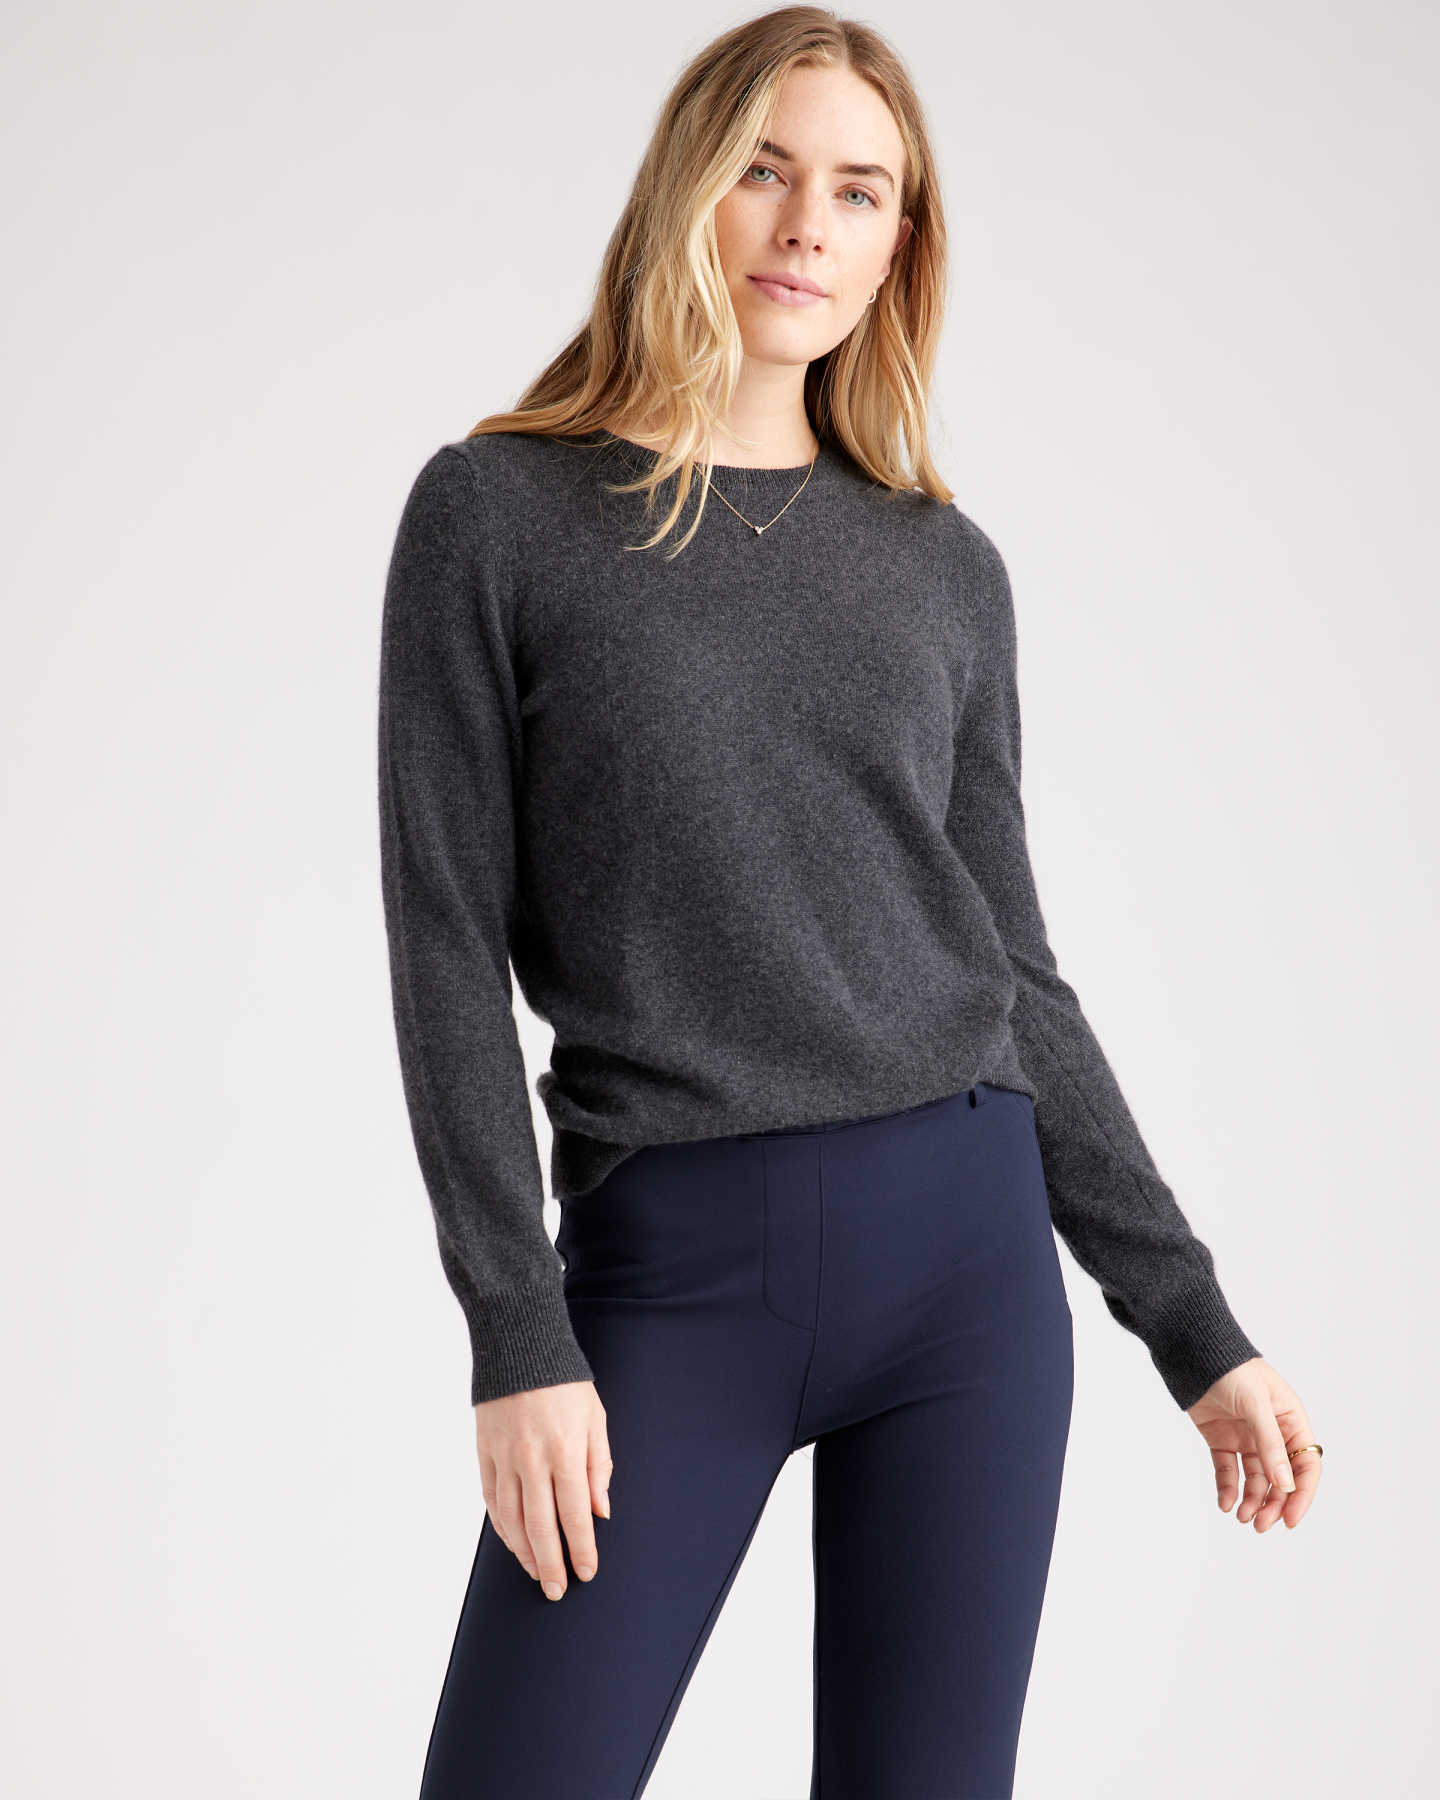 Luxe Baby Cashmere Crewneck Sweater - Charcoal - 0 - Thumbnail